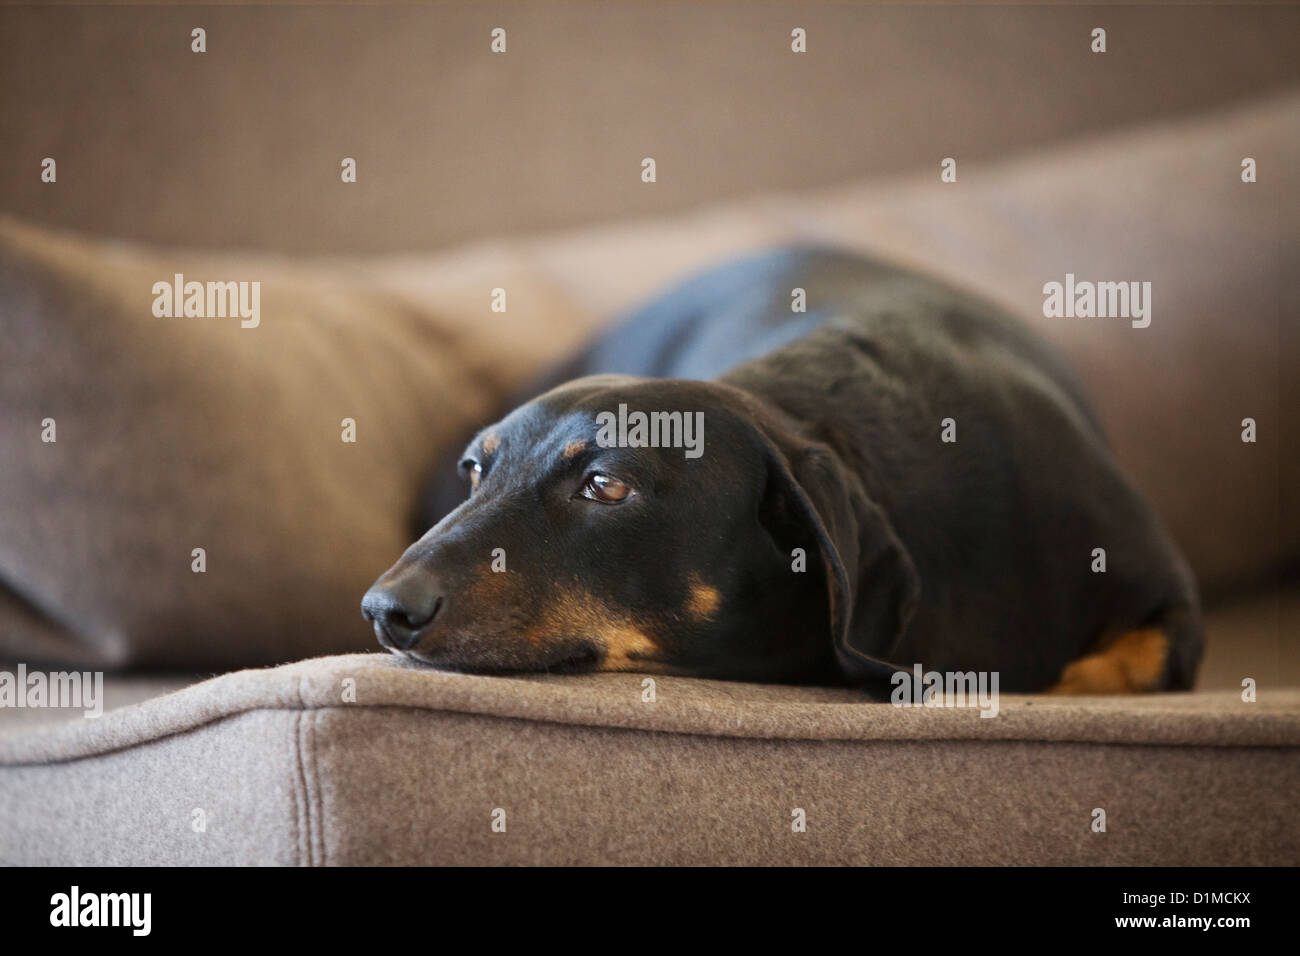 Dachshund dog relaxing on couch. Stock Photo